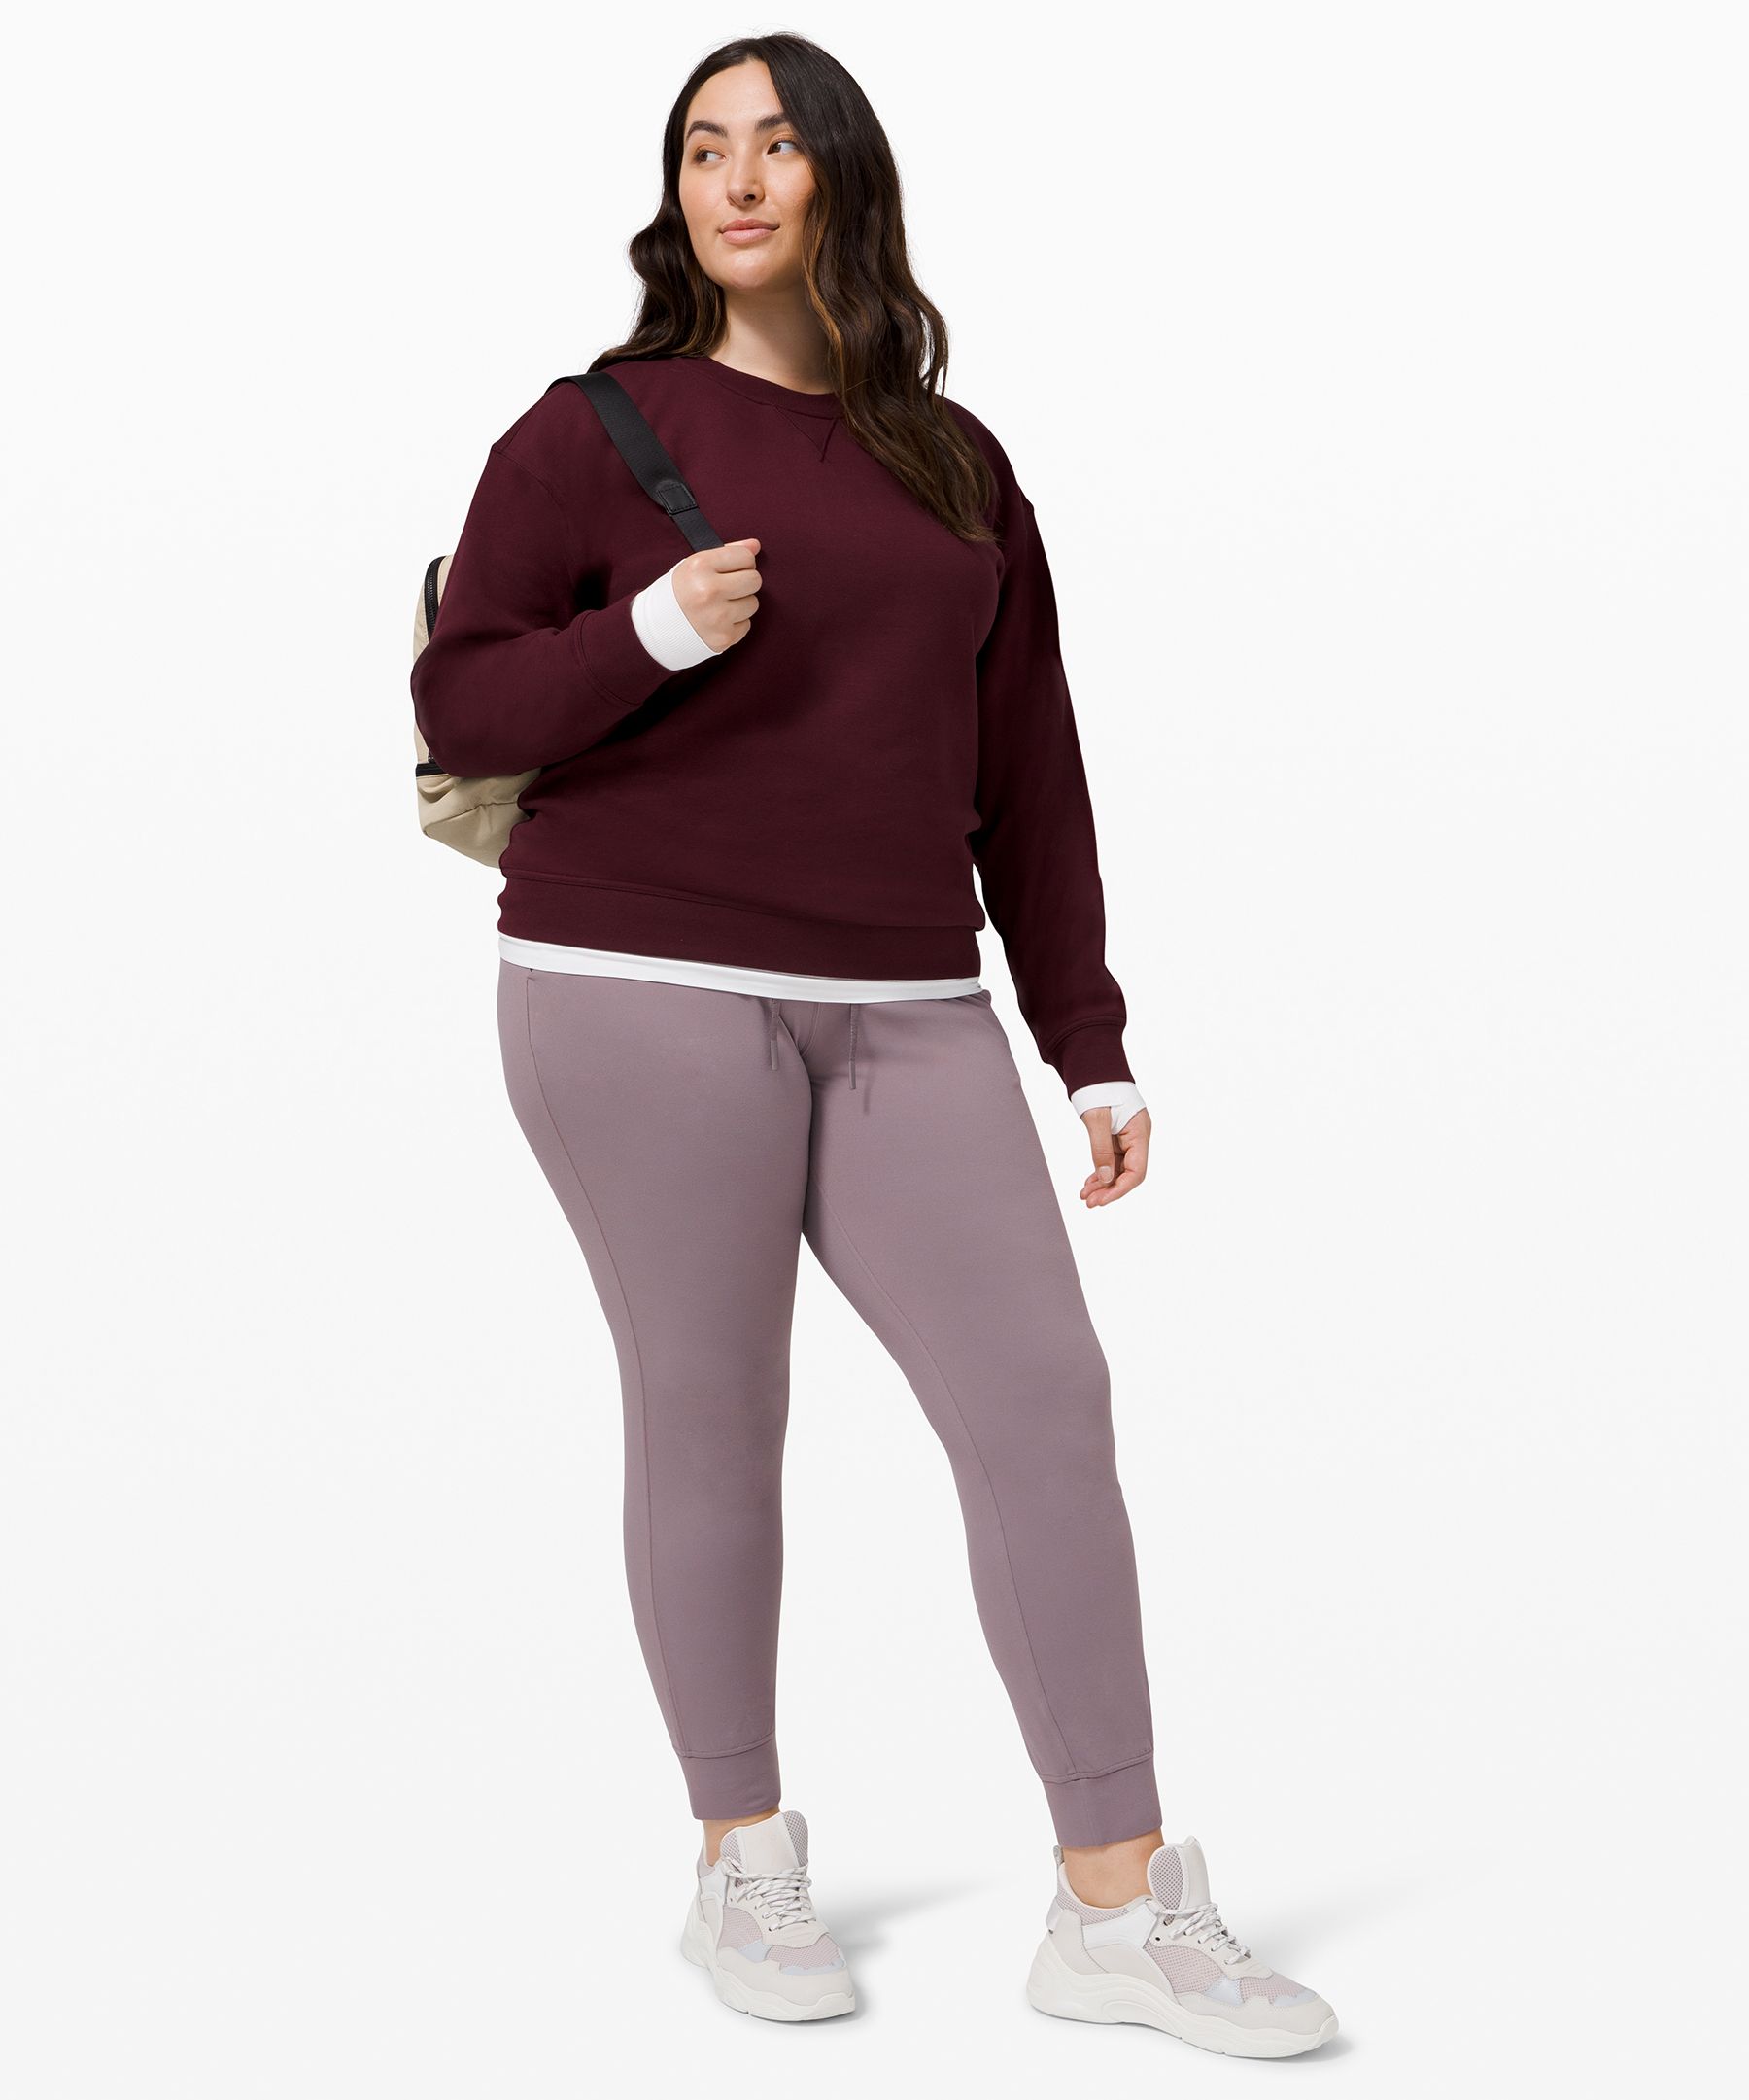 Fit Review: Jet Crop Slim Trousers *RULU - The Sweat Edit